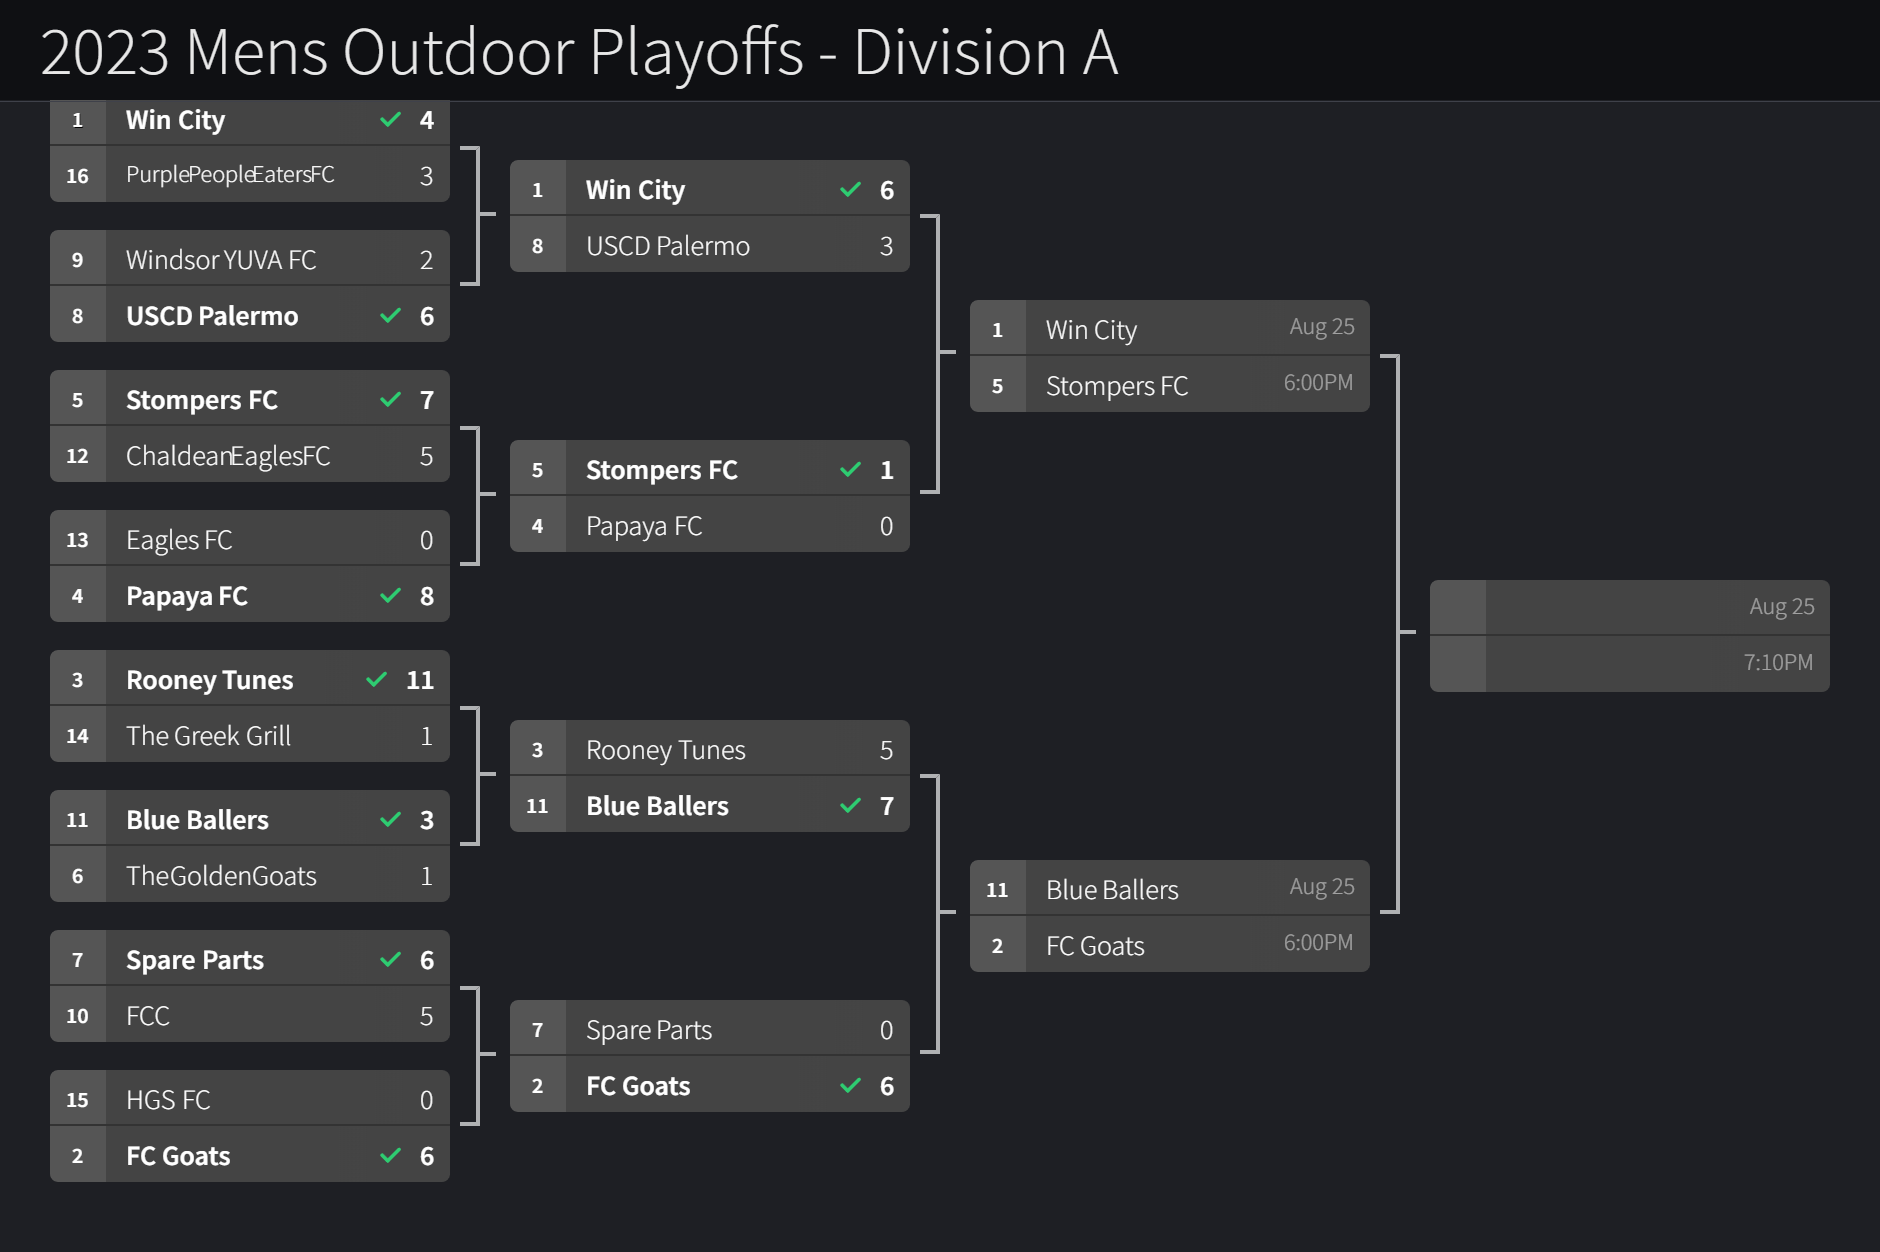 2023 Mens Outdoor Playoffs - Division A (3)